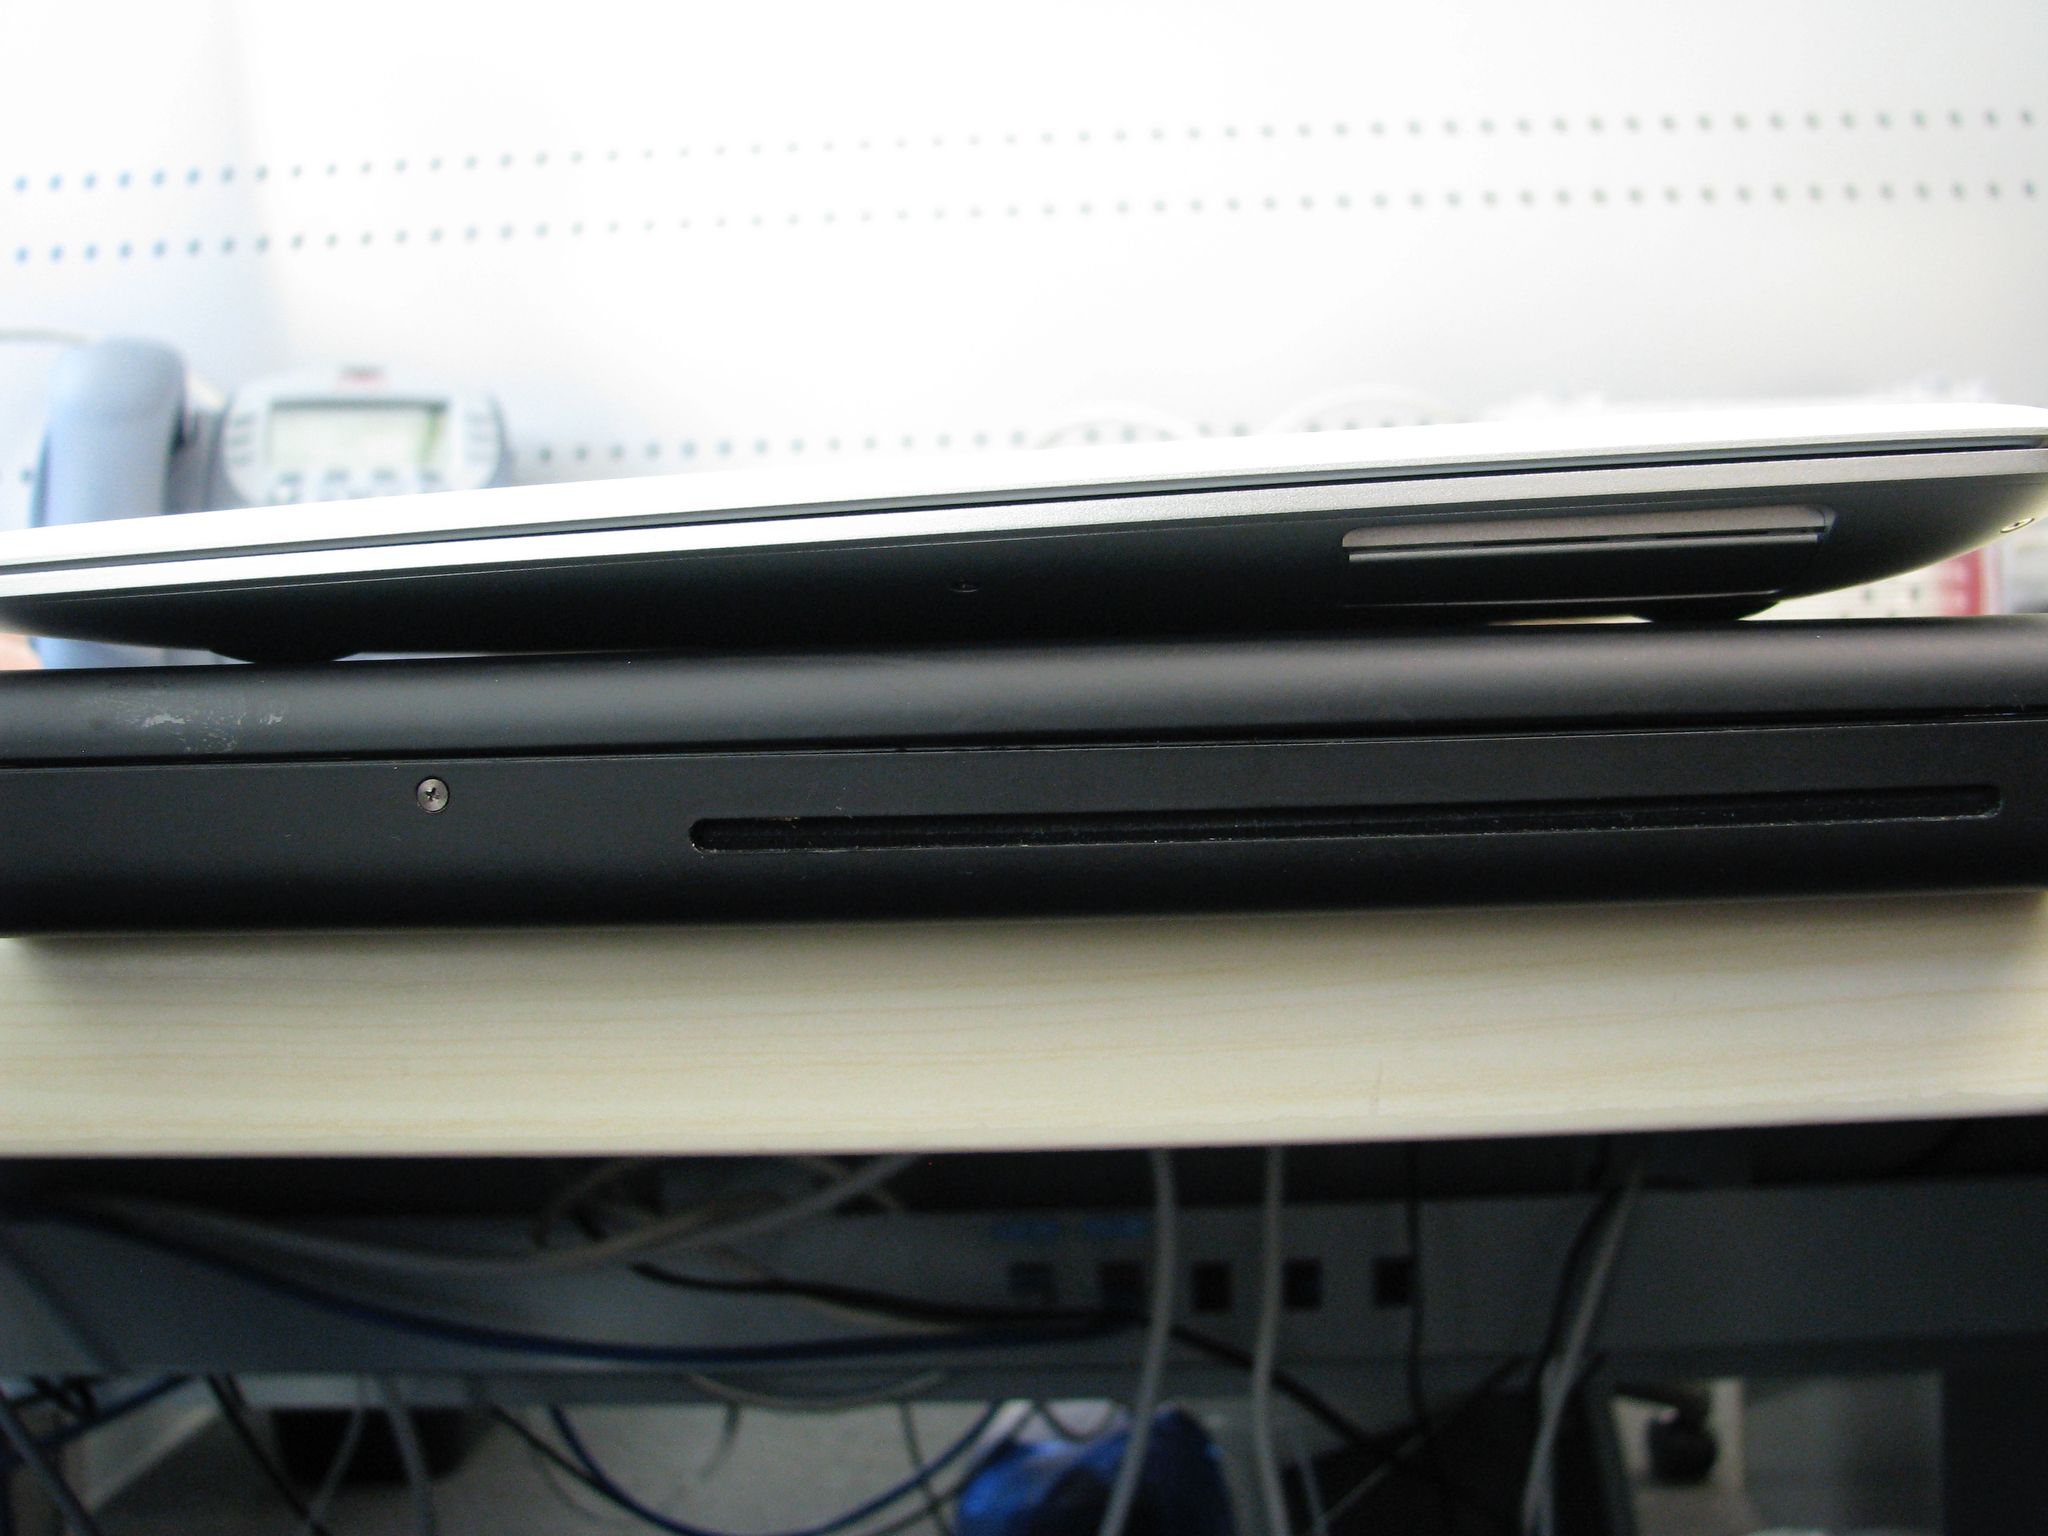 A photo taken from the side of a first-generation MacBook Air sitting on top of a black polycarbonate MacBook.